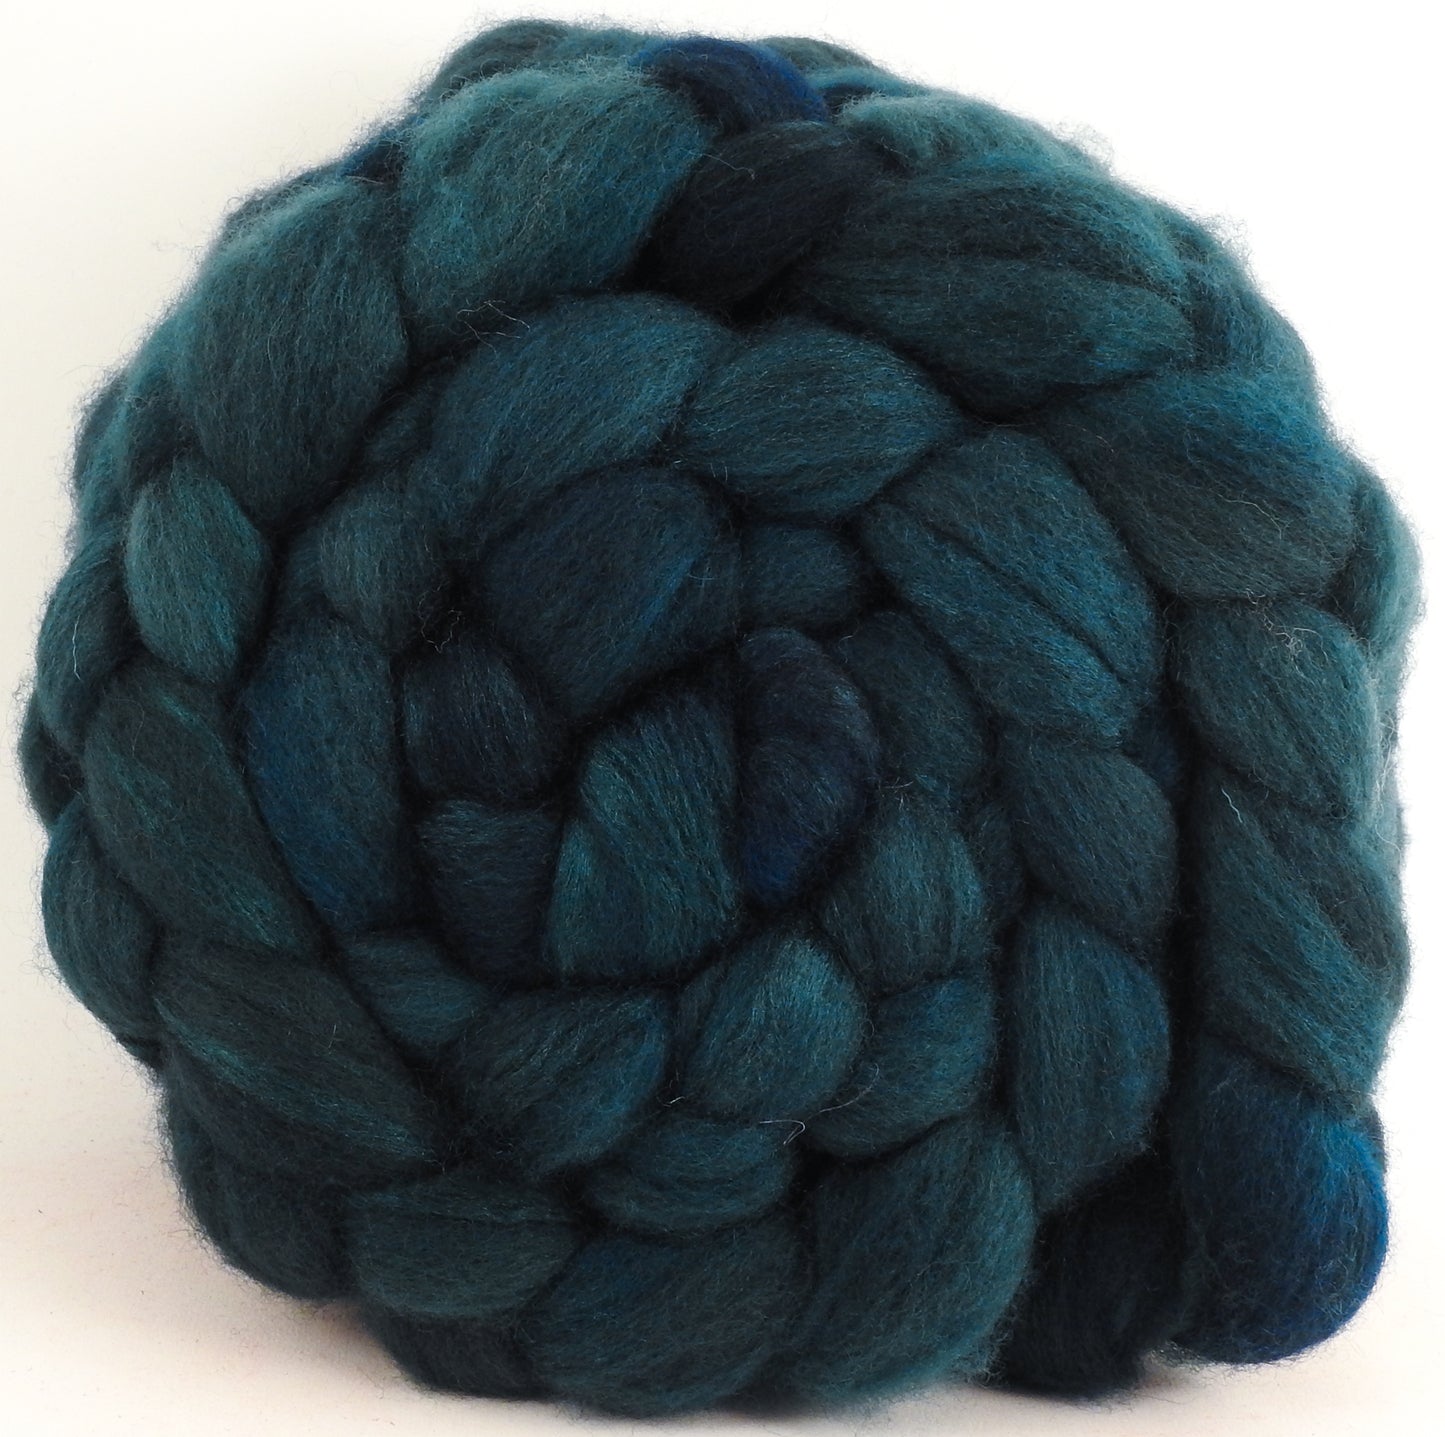 Leviathan - Blue-faced Leicester/ Tussah Silk (70/30)